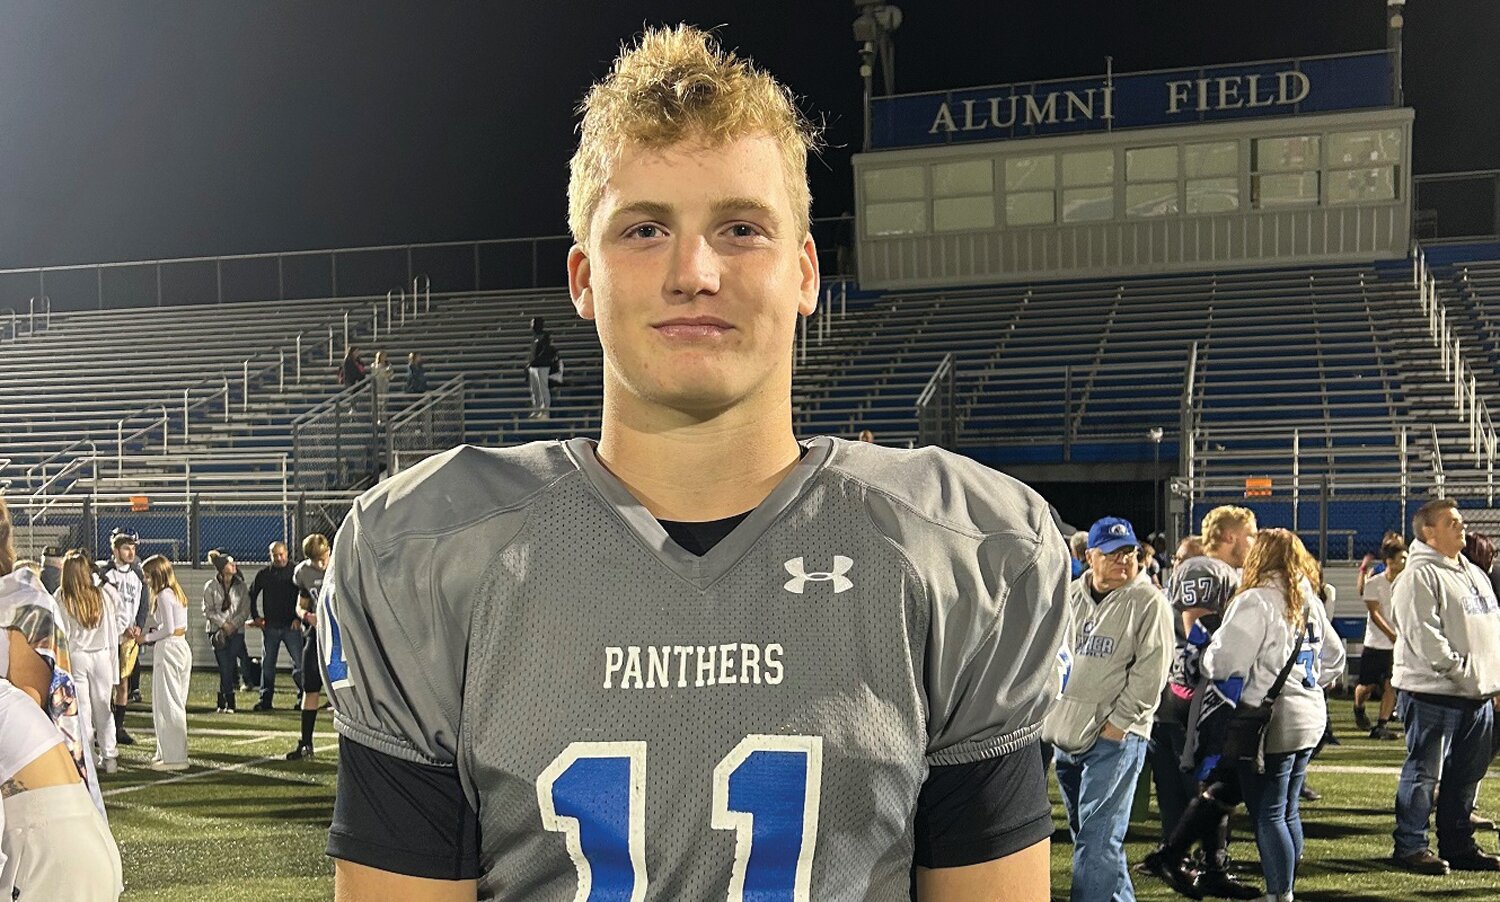 Quakertown's Anthony Ferrugio on Friday night scored touchdowns on both the offensive and defensive sides of the ball against Council Rock North. He caught a 15-yard touchdown pass, then a minute later, intercepted a pass ran it into the end zone.